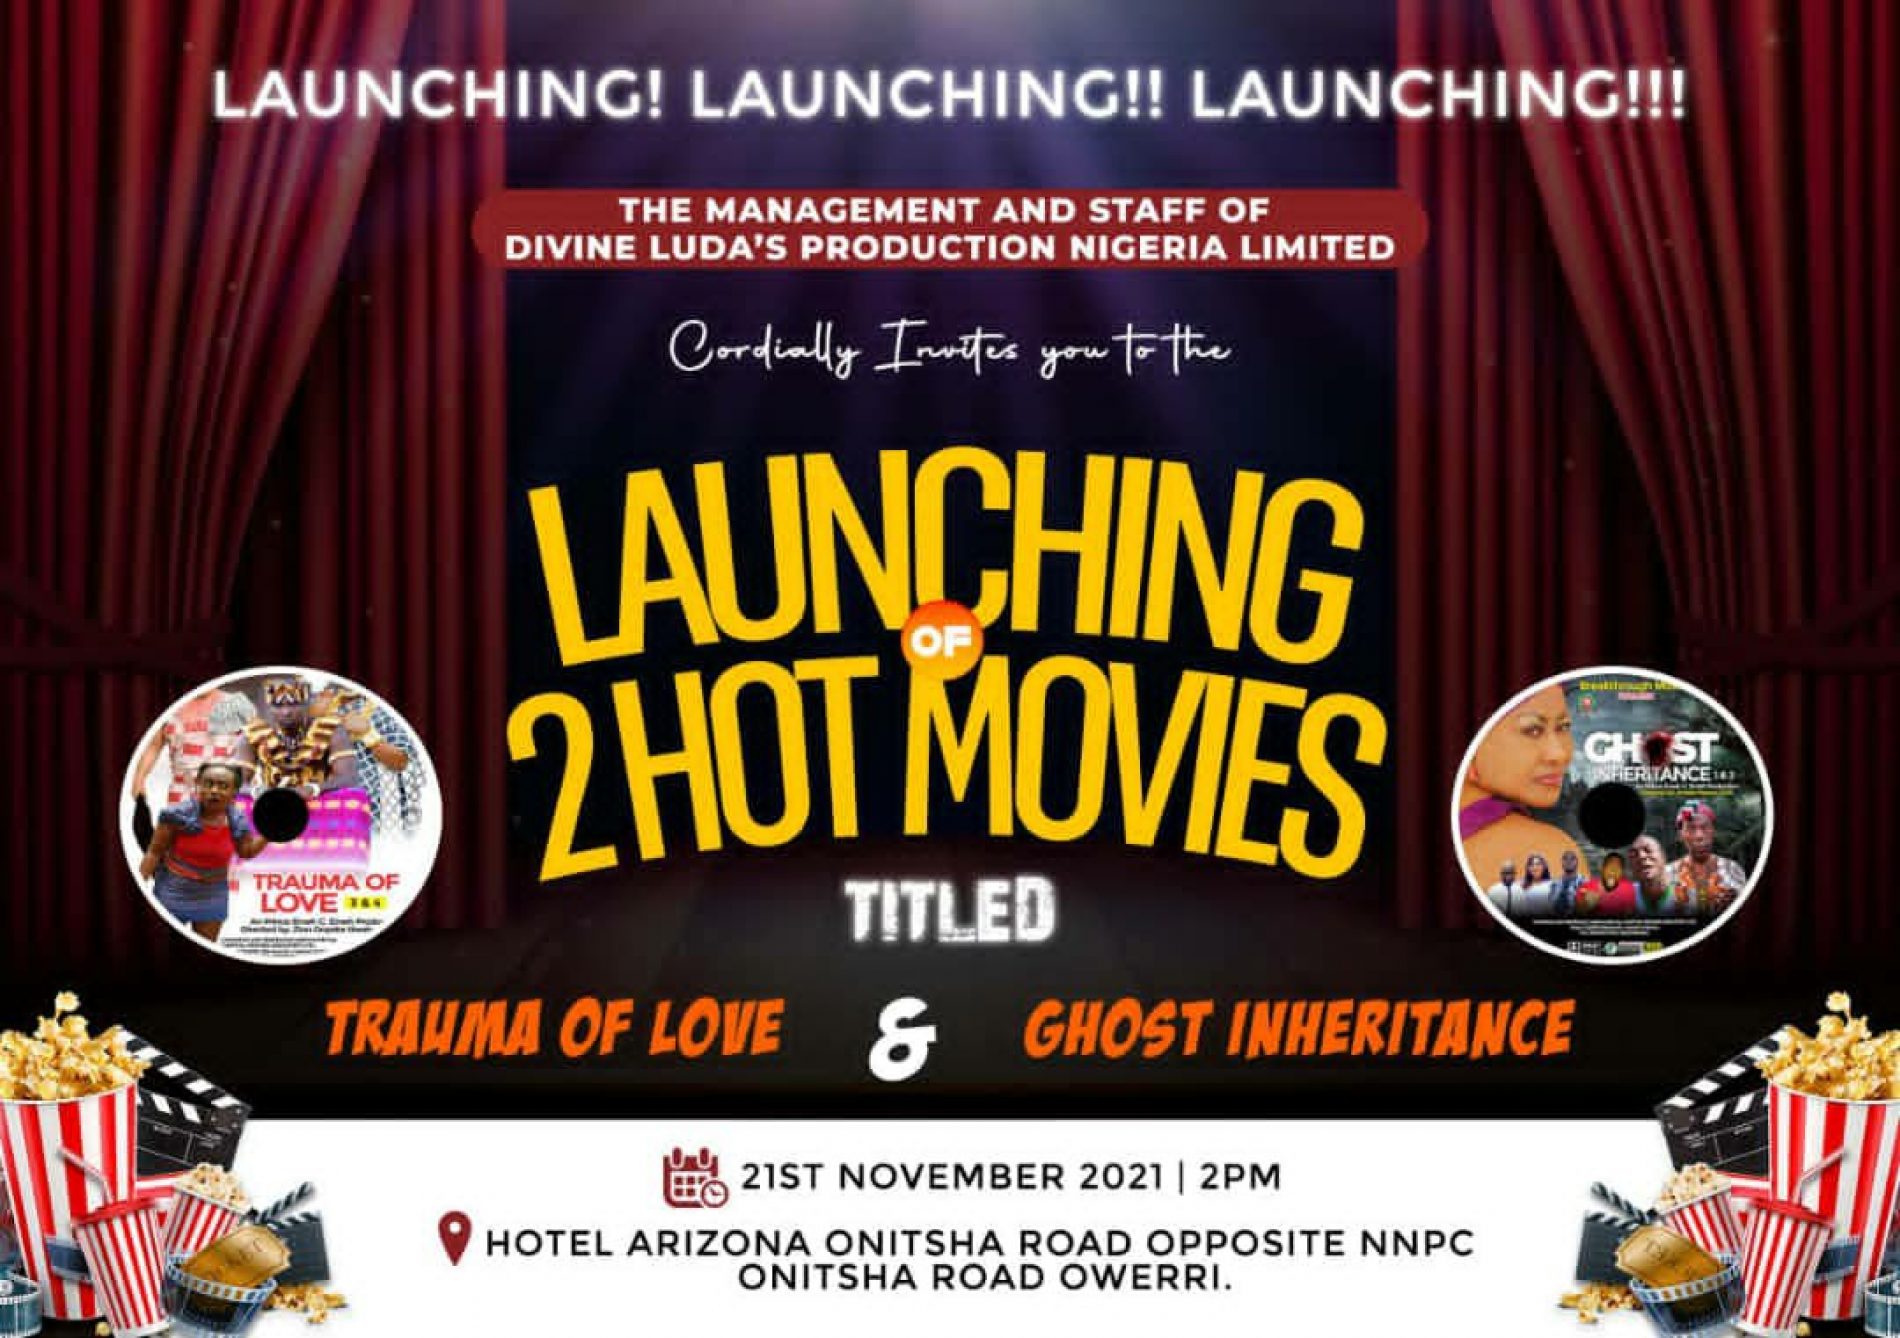 Divine Luda’s Production Launches 2 Hot Movies Nov 21